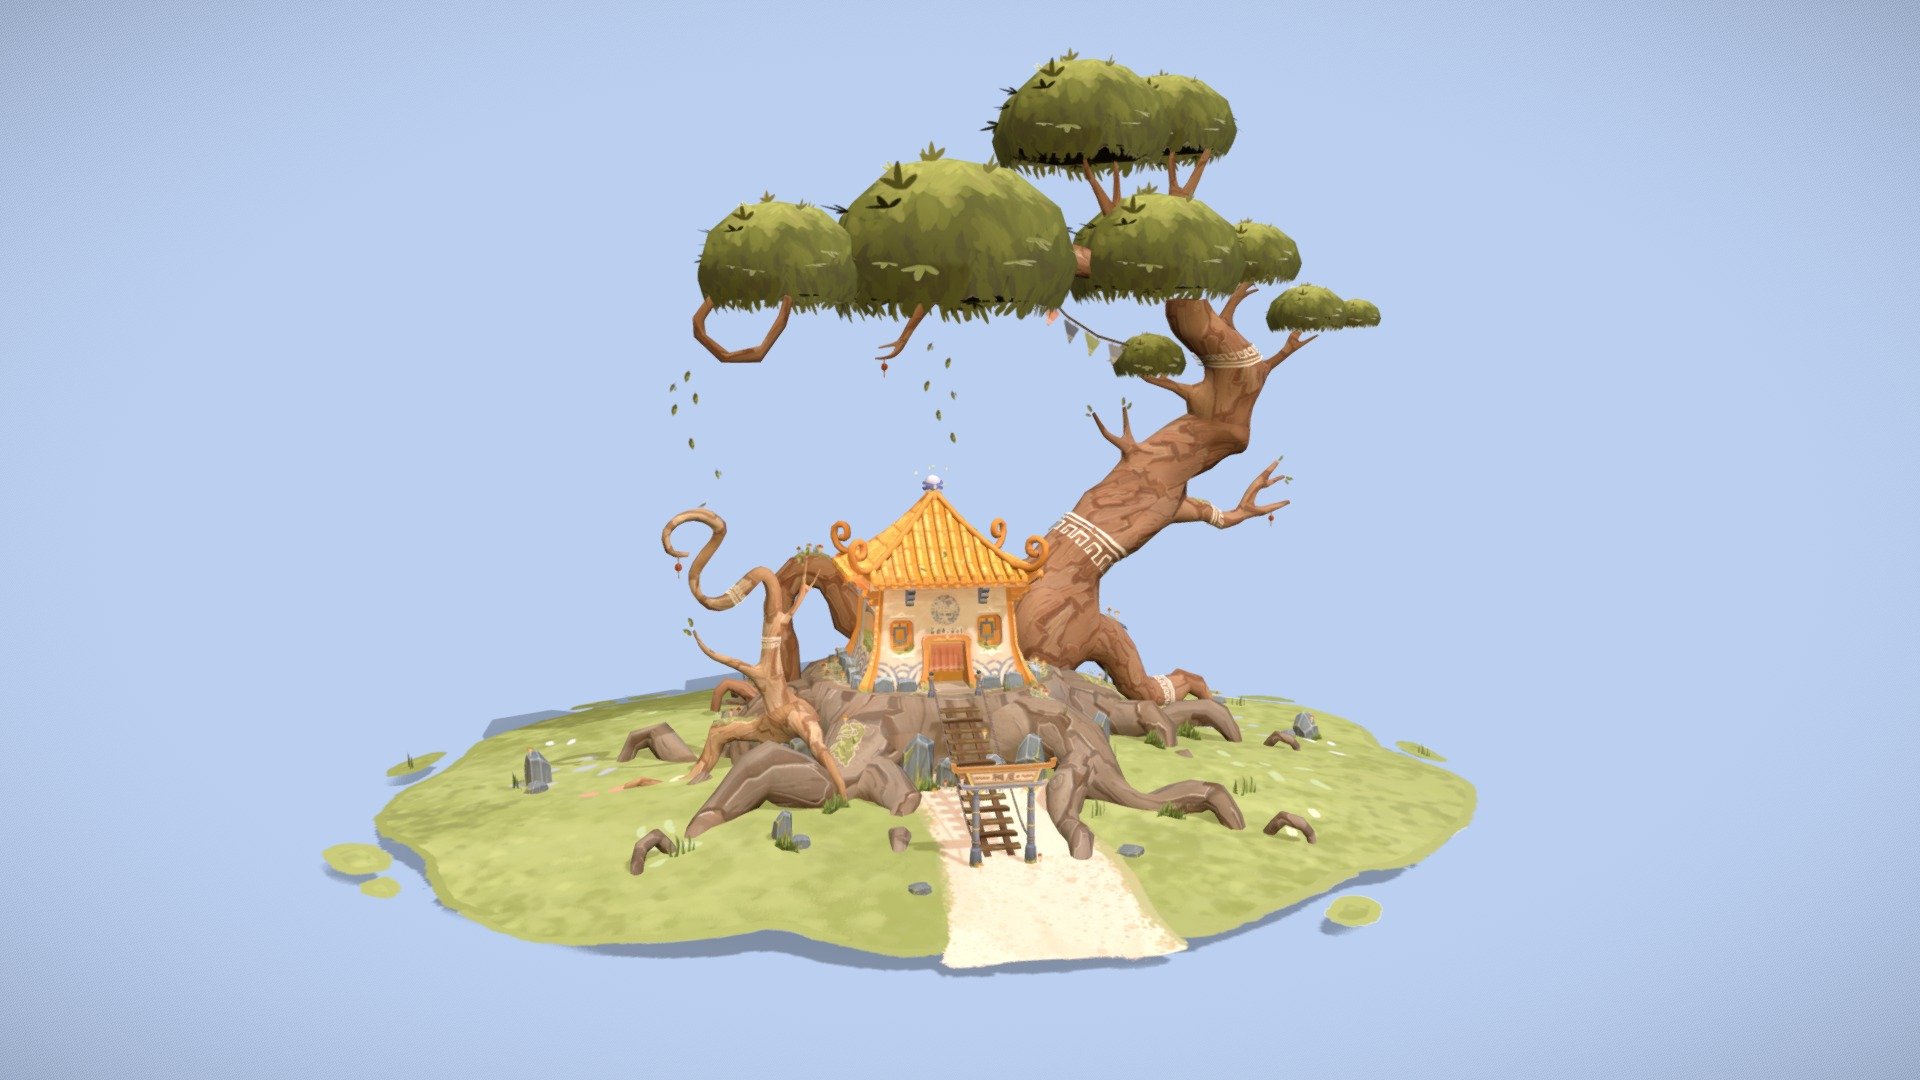 Project made at my school Isart Digital from September to October 2022. It is a Chinese-style treehouse in which lives a secluded witch who uses mushrooms to create eerie potions.

Modeling in Maya, Texturing in Photoshop and Integrated in Unity 3d model